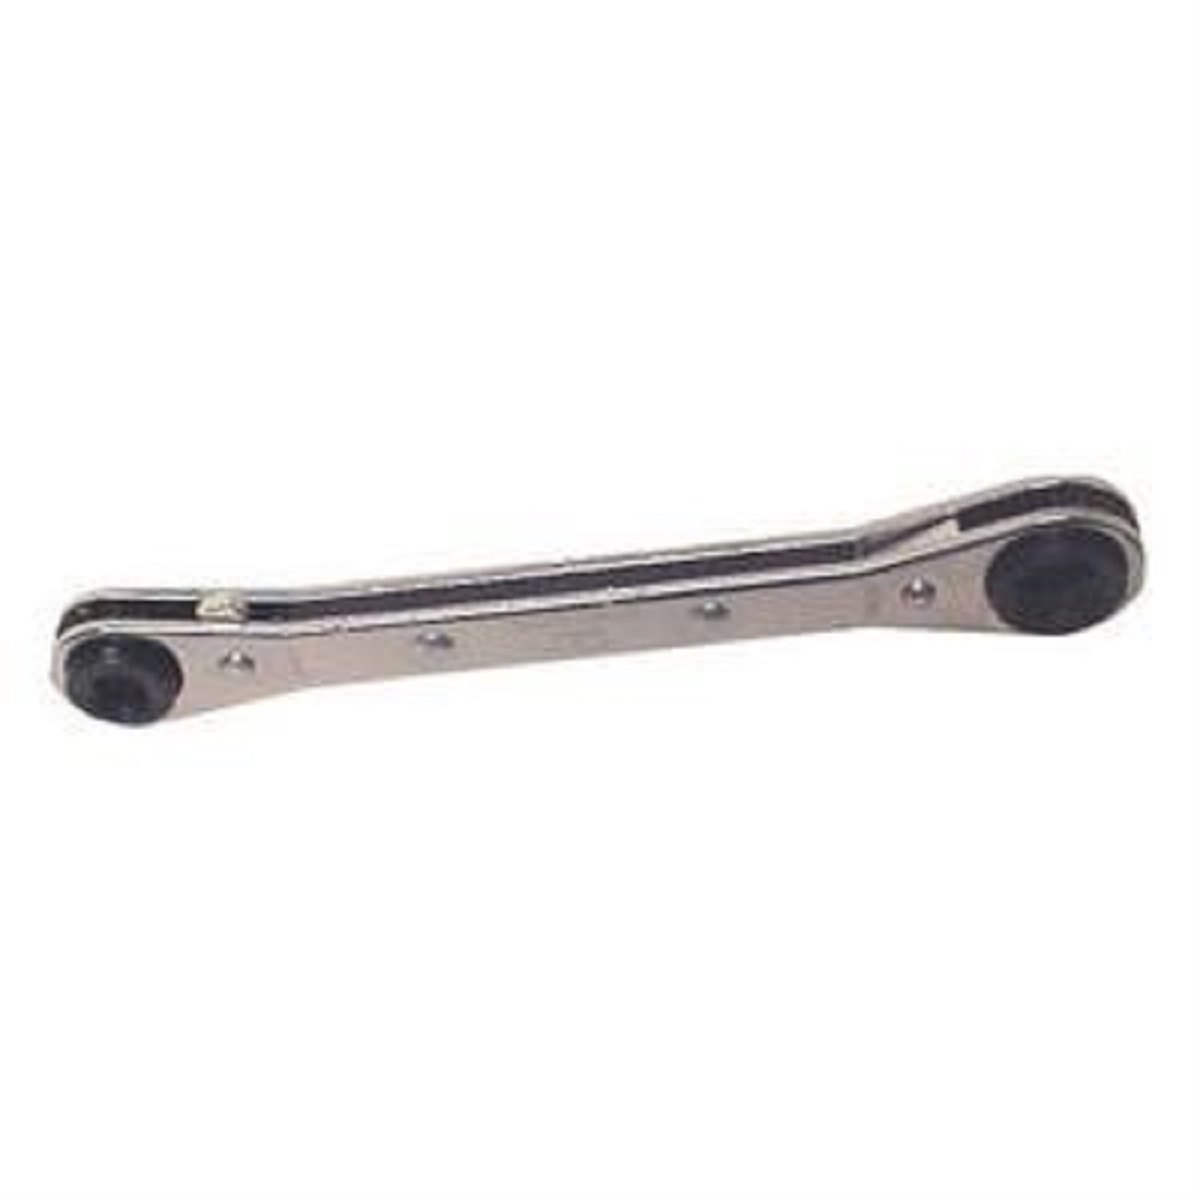 Reversible/Offset Ratchet Wrench - Supersedes 10983